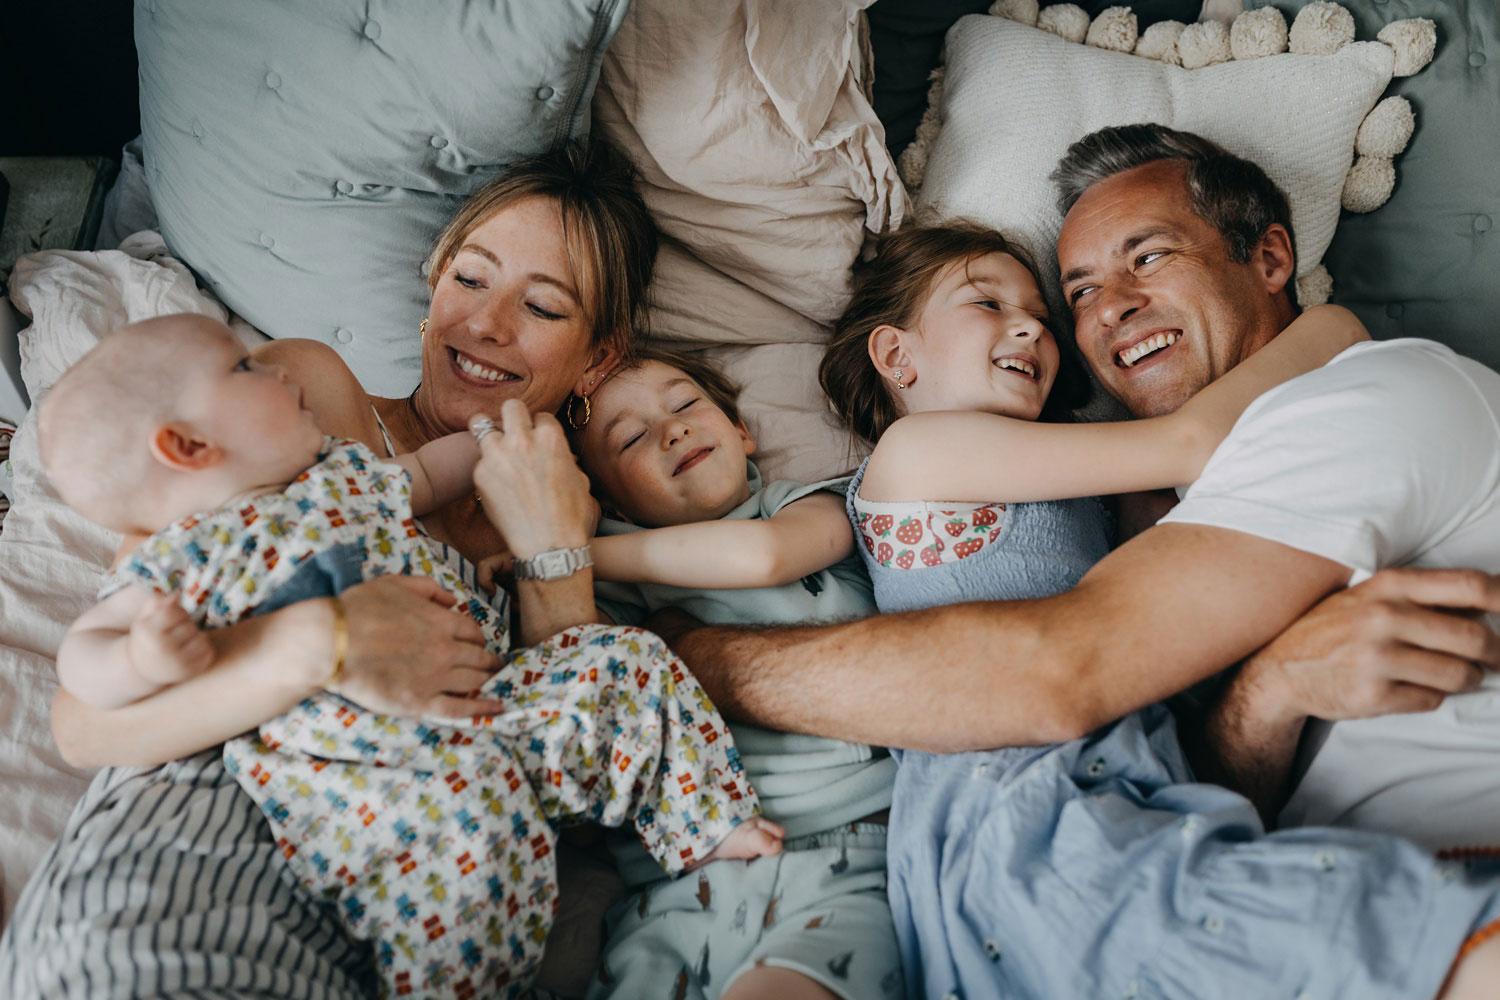 Copenhagen family photographer captures heartwarming moments of a family cuddling at home